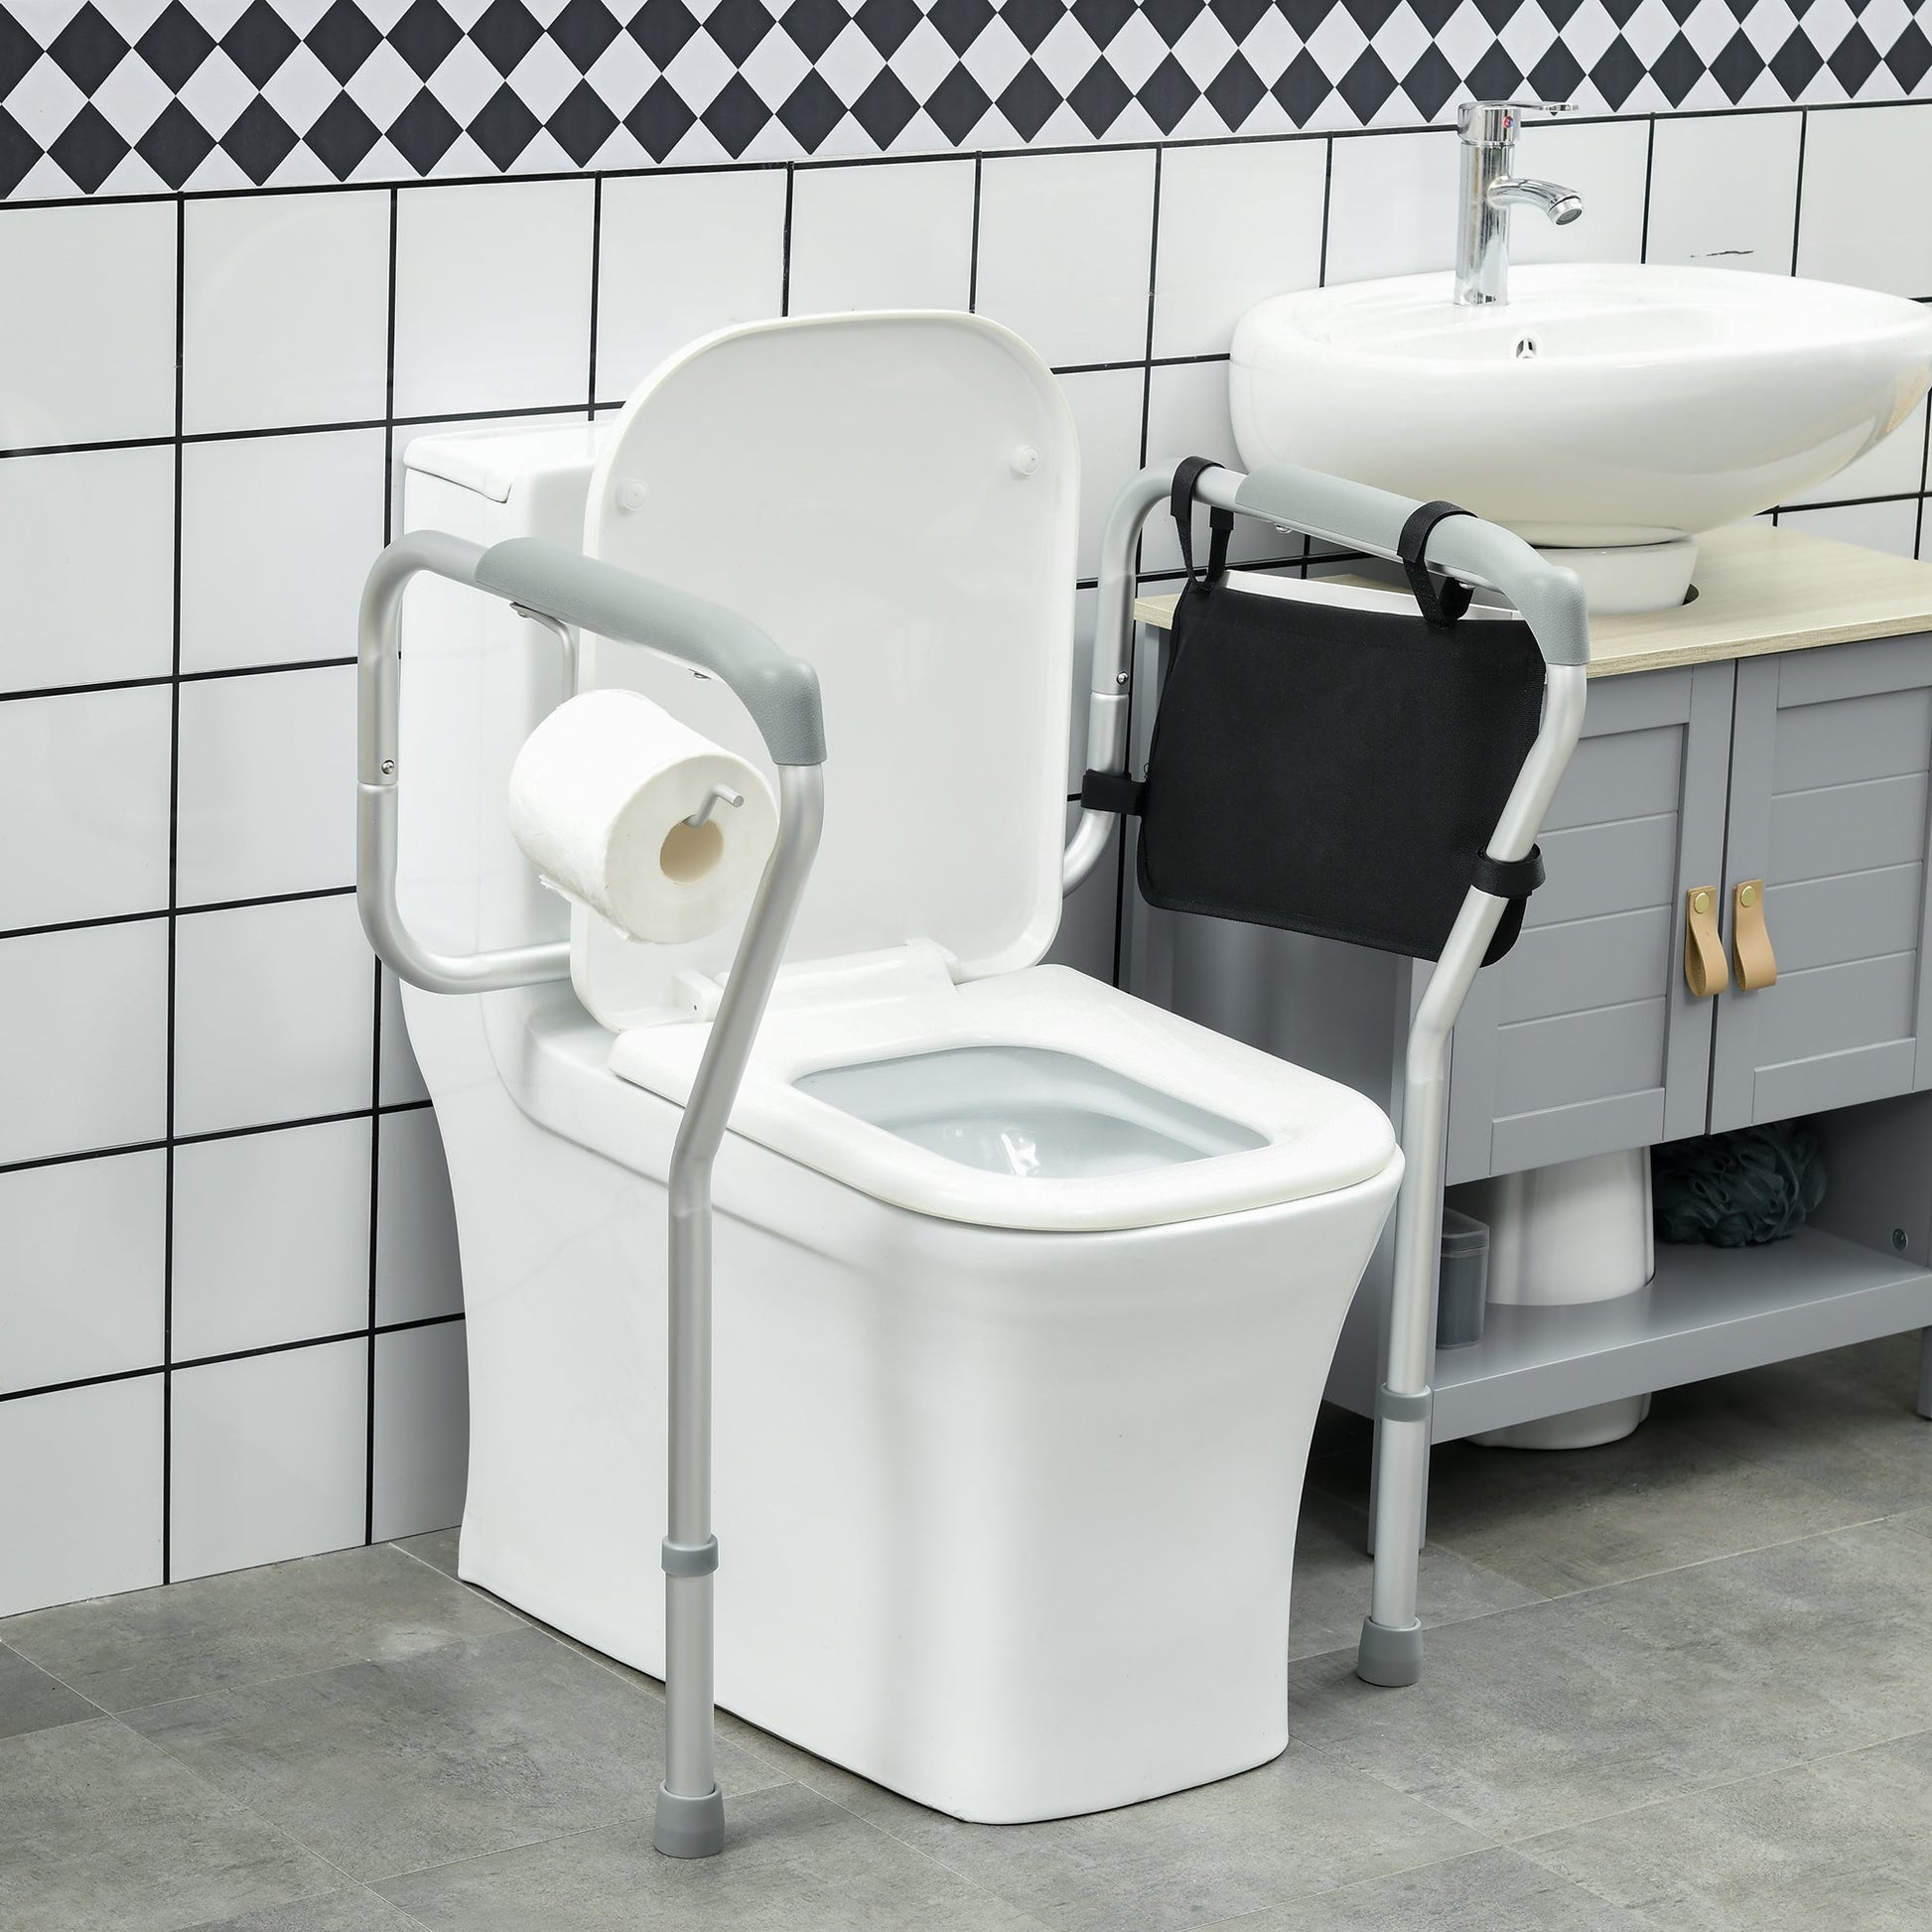 Toilet Safety Rail for Elderly, 300lbs Toilet Safety Frame with Adjustable Height and Width, Storage Pocket, Padded Arms, Assist Grab Bar for Seniors, Easy Installation at Gallery Canada